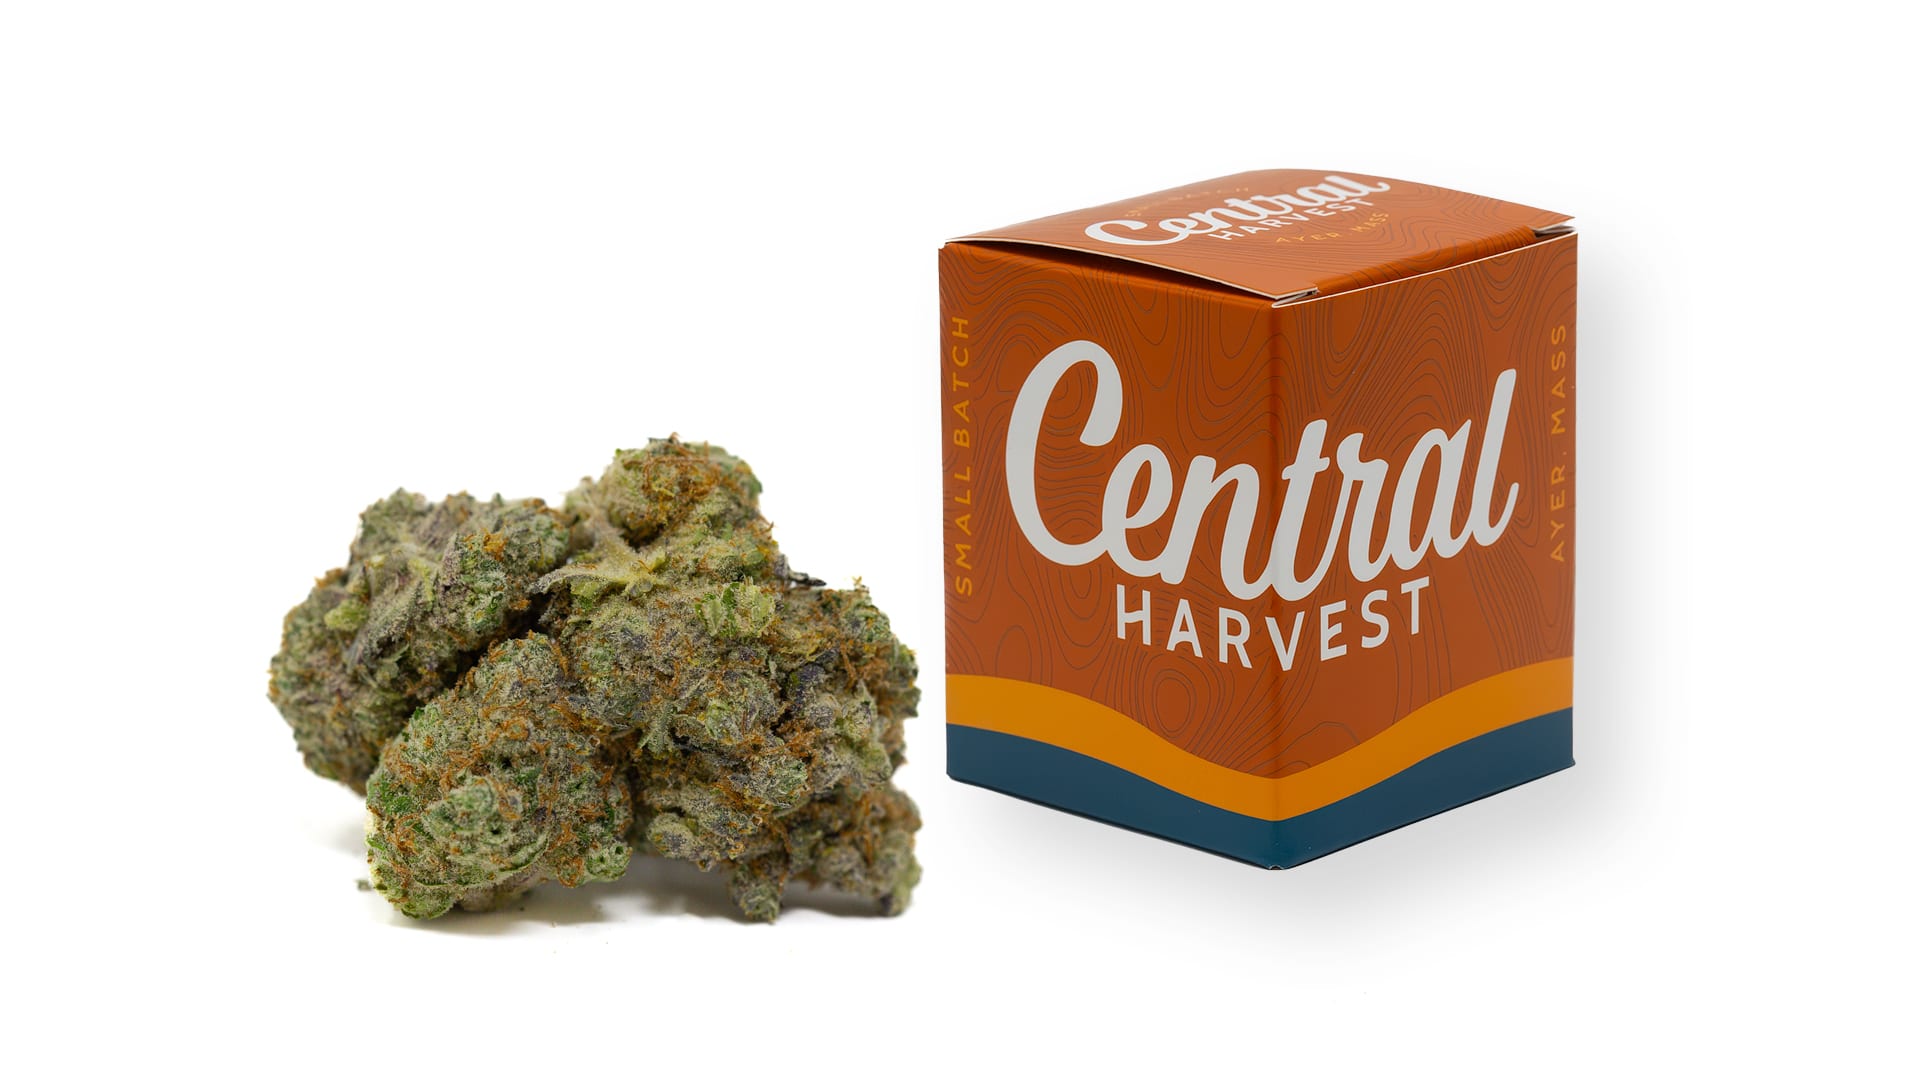 Tickle Burger is an Indica Cannabis Strain grown at Central Harvest